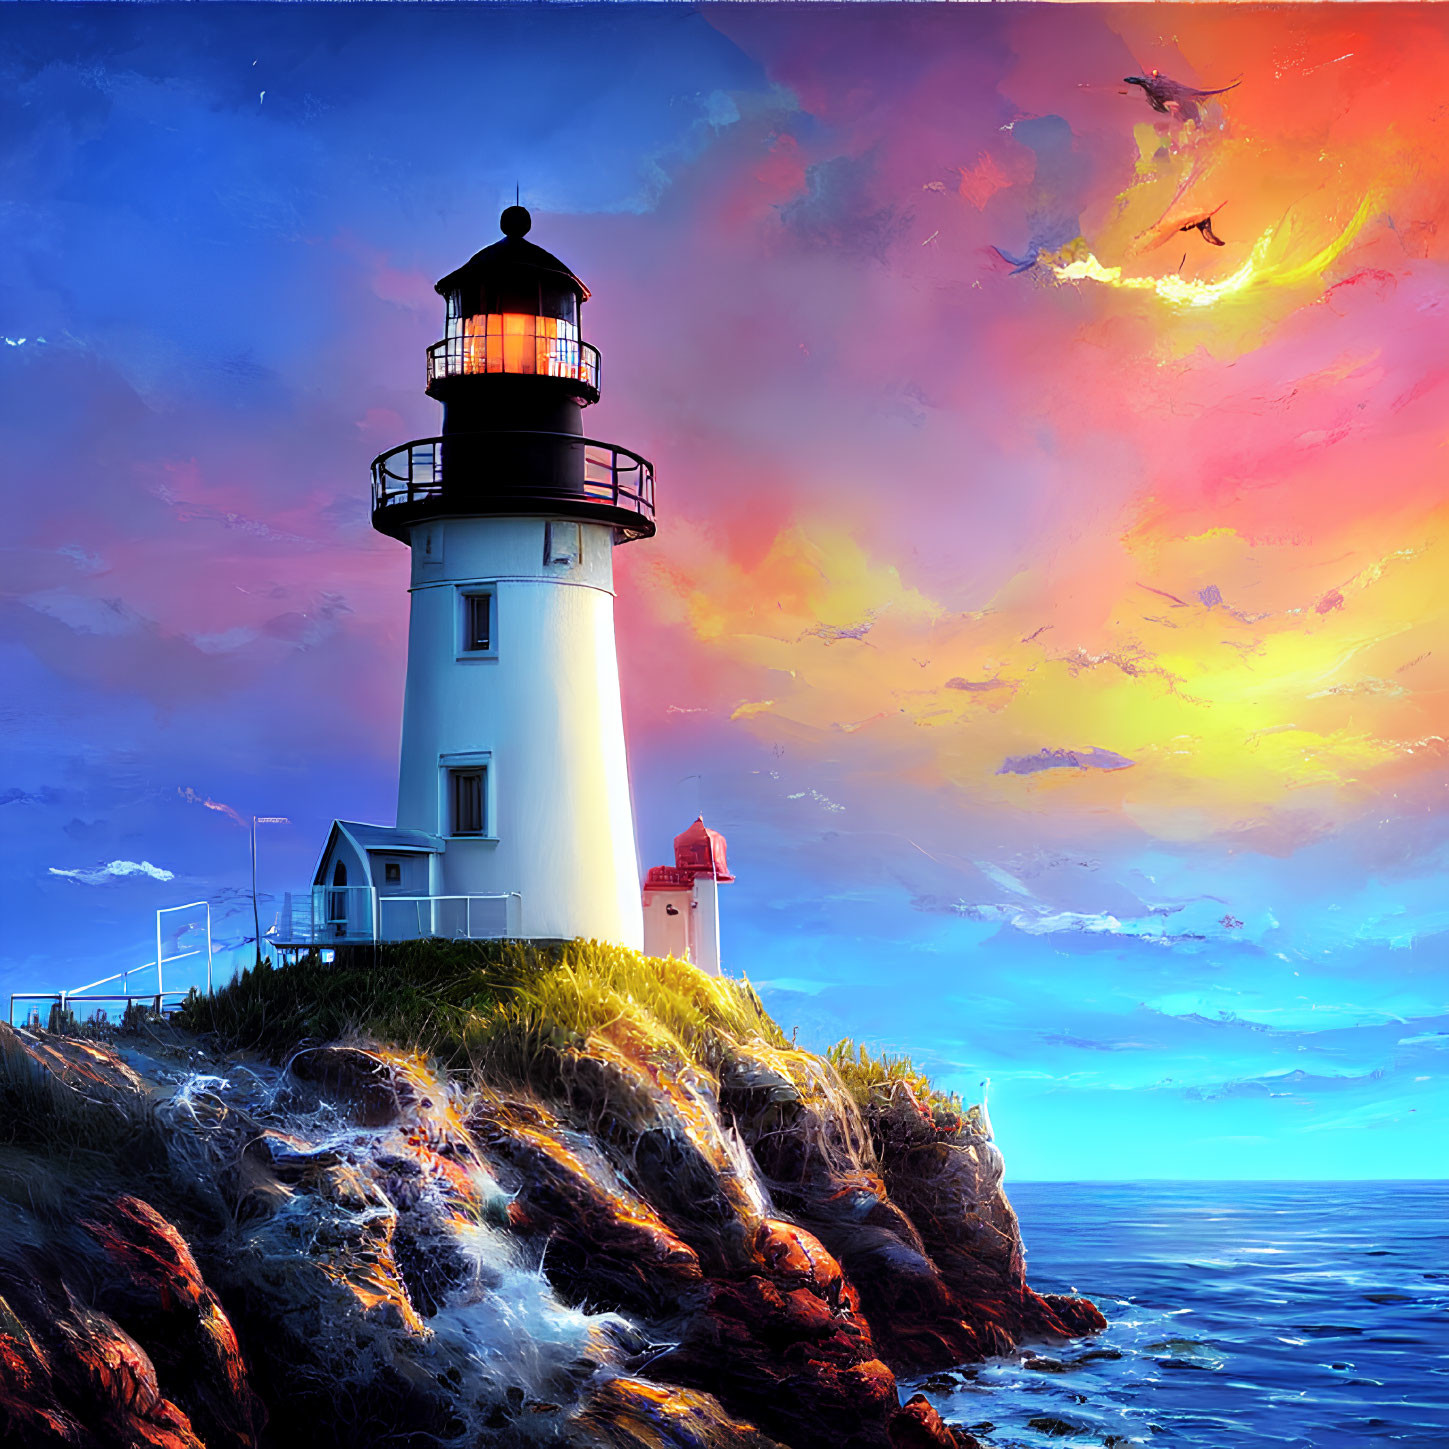 Scenic sunset view of lighthouse on cliff with colorful skies and calm seas